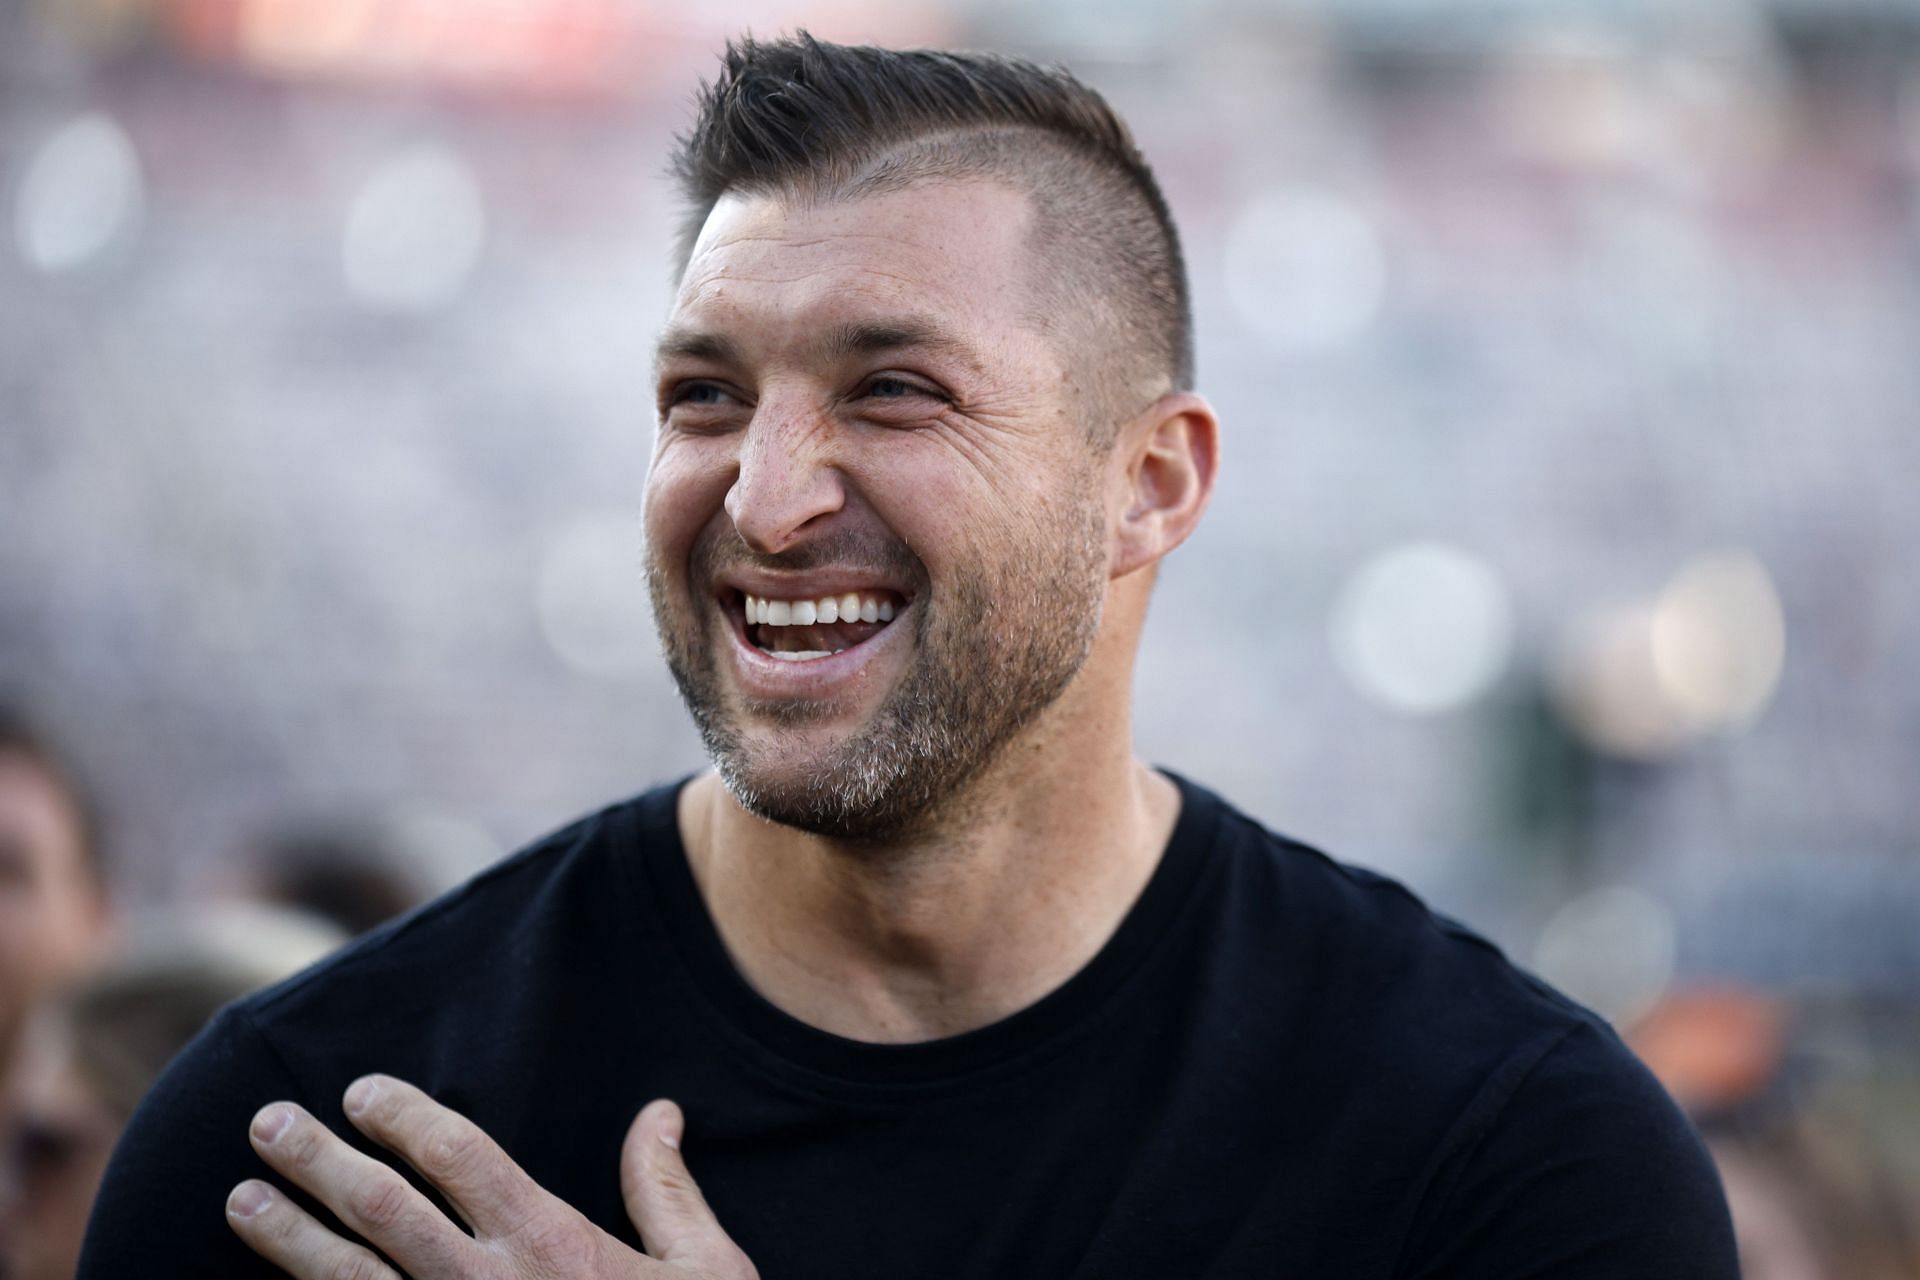 Tim Tebow played college football at Florida